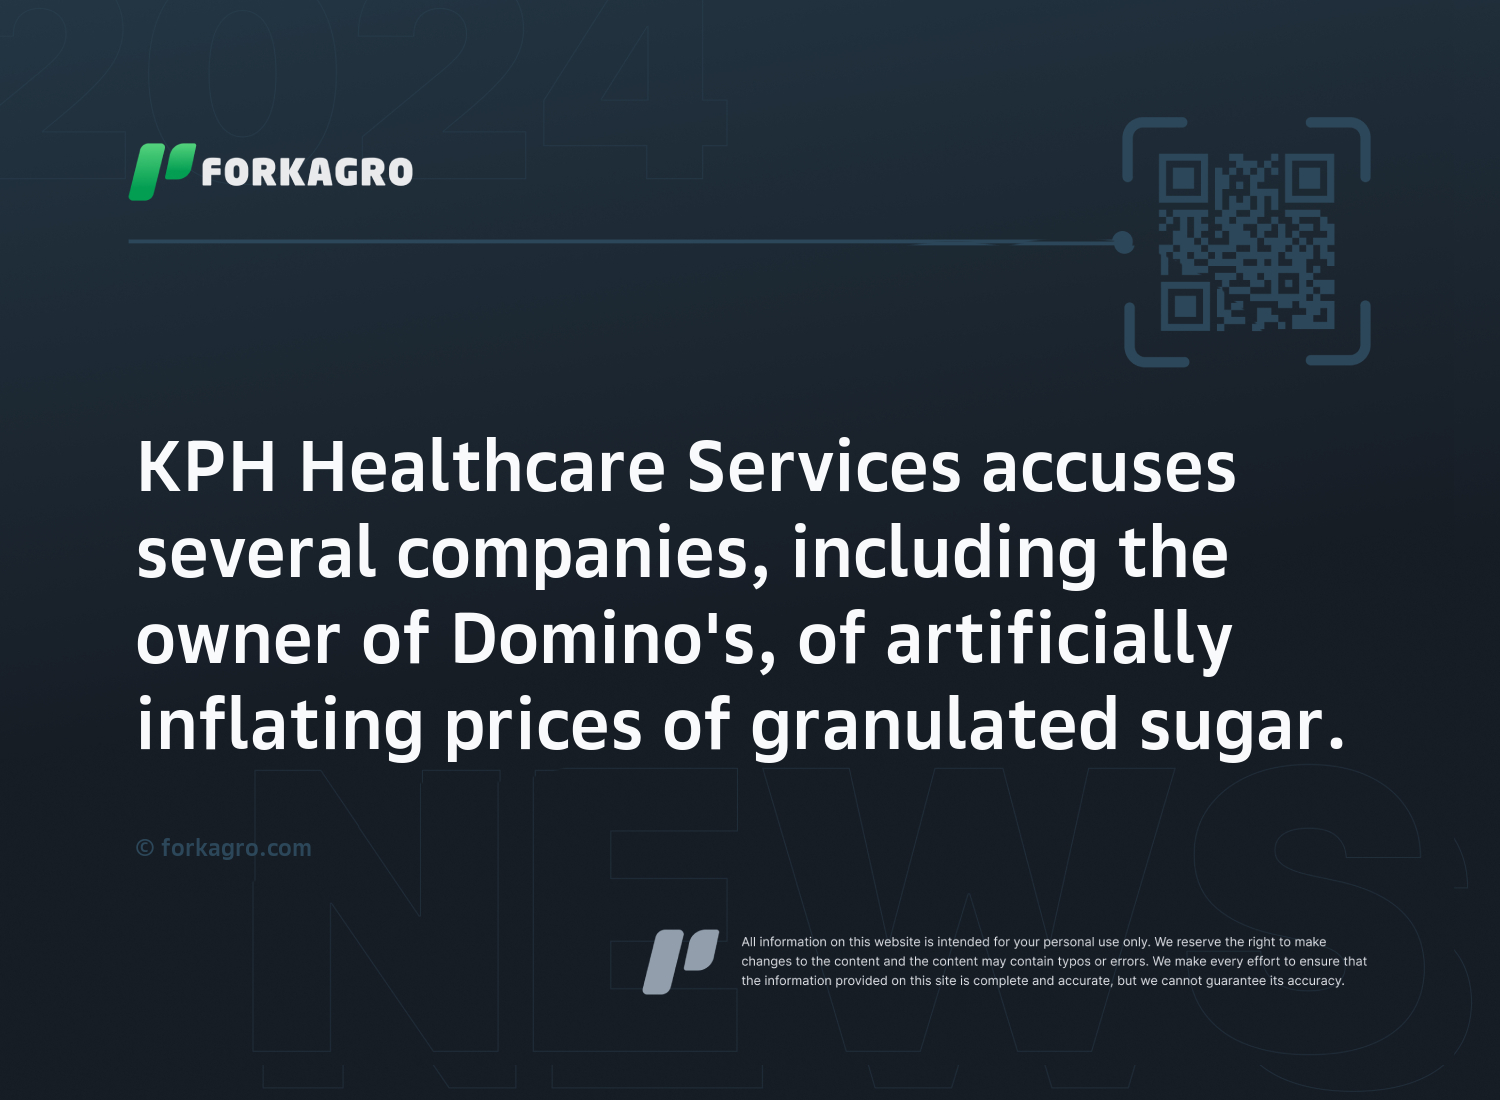 KPH Healthcare Services accuses several companies, including the owner of Domino's, of artificially inflating prices of granulated sugar.